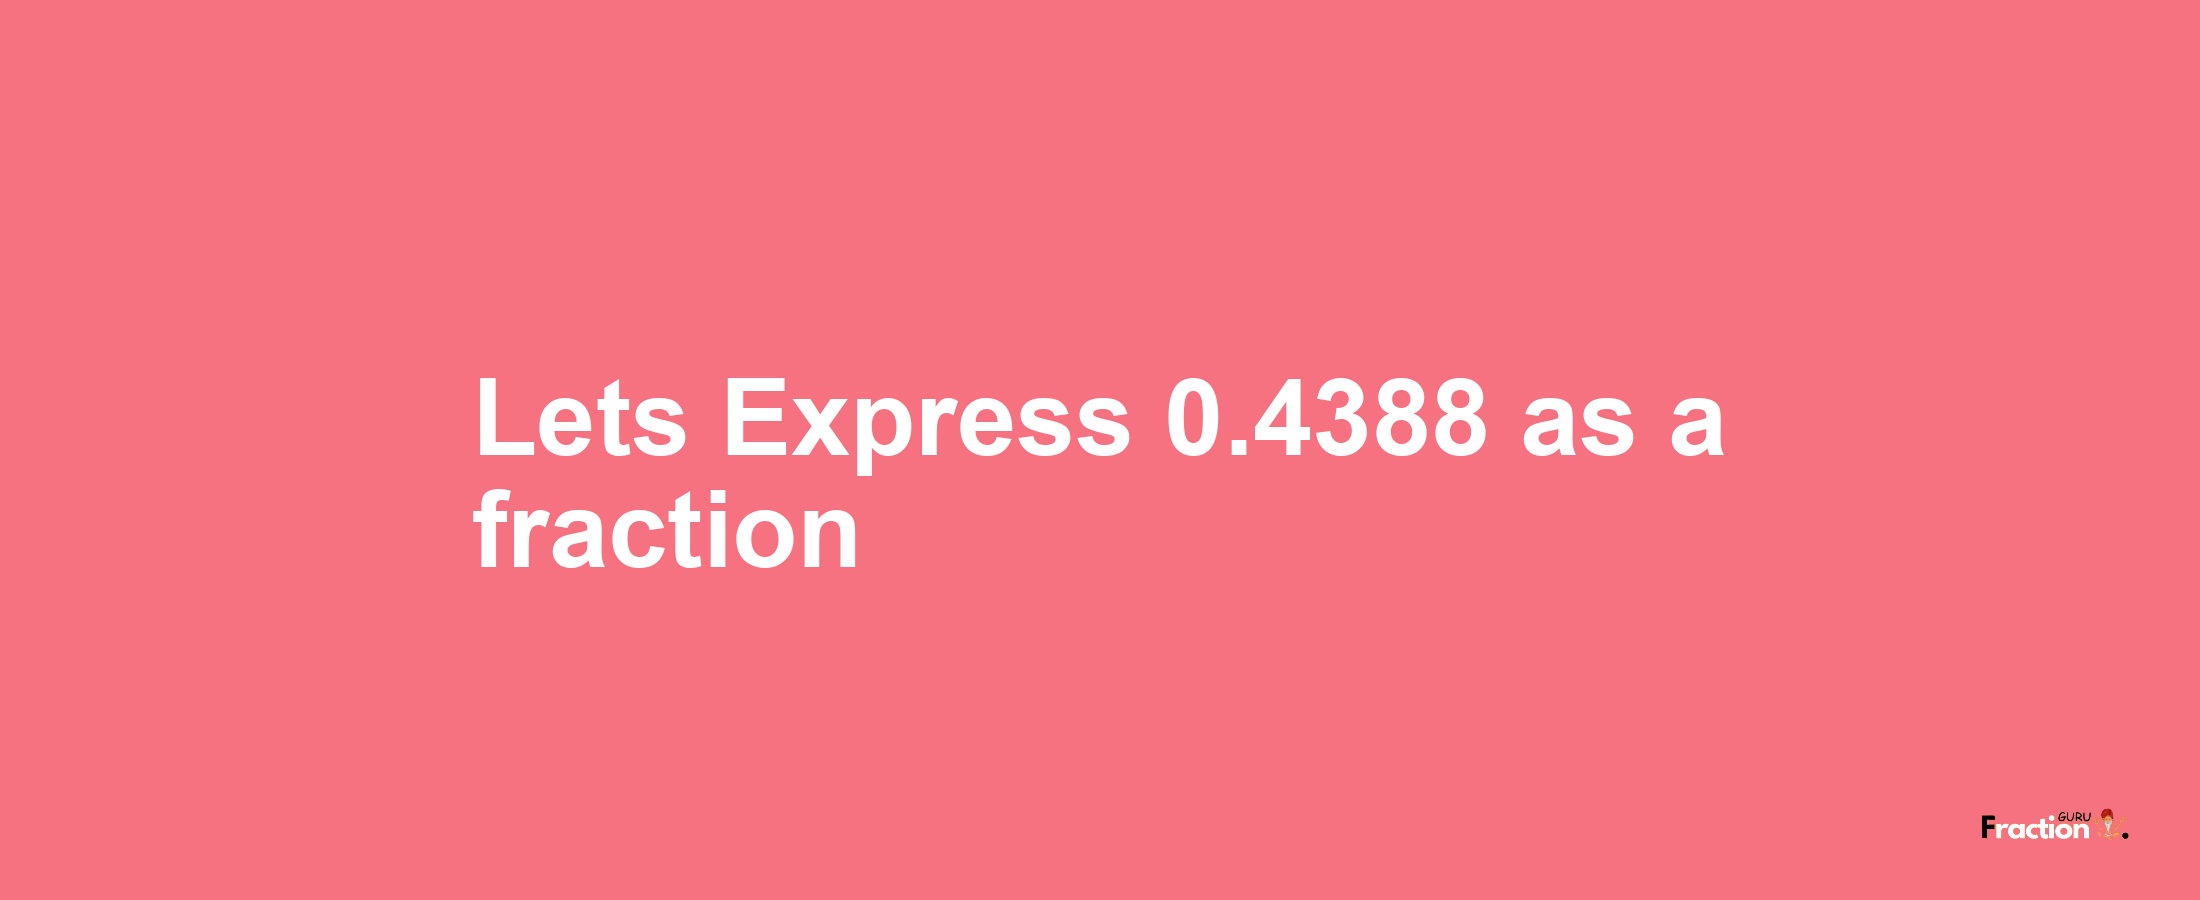 Lets Express 0.4388 as afraction